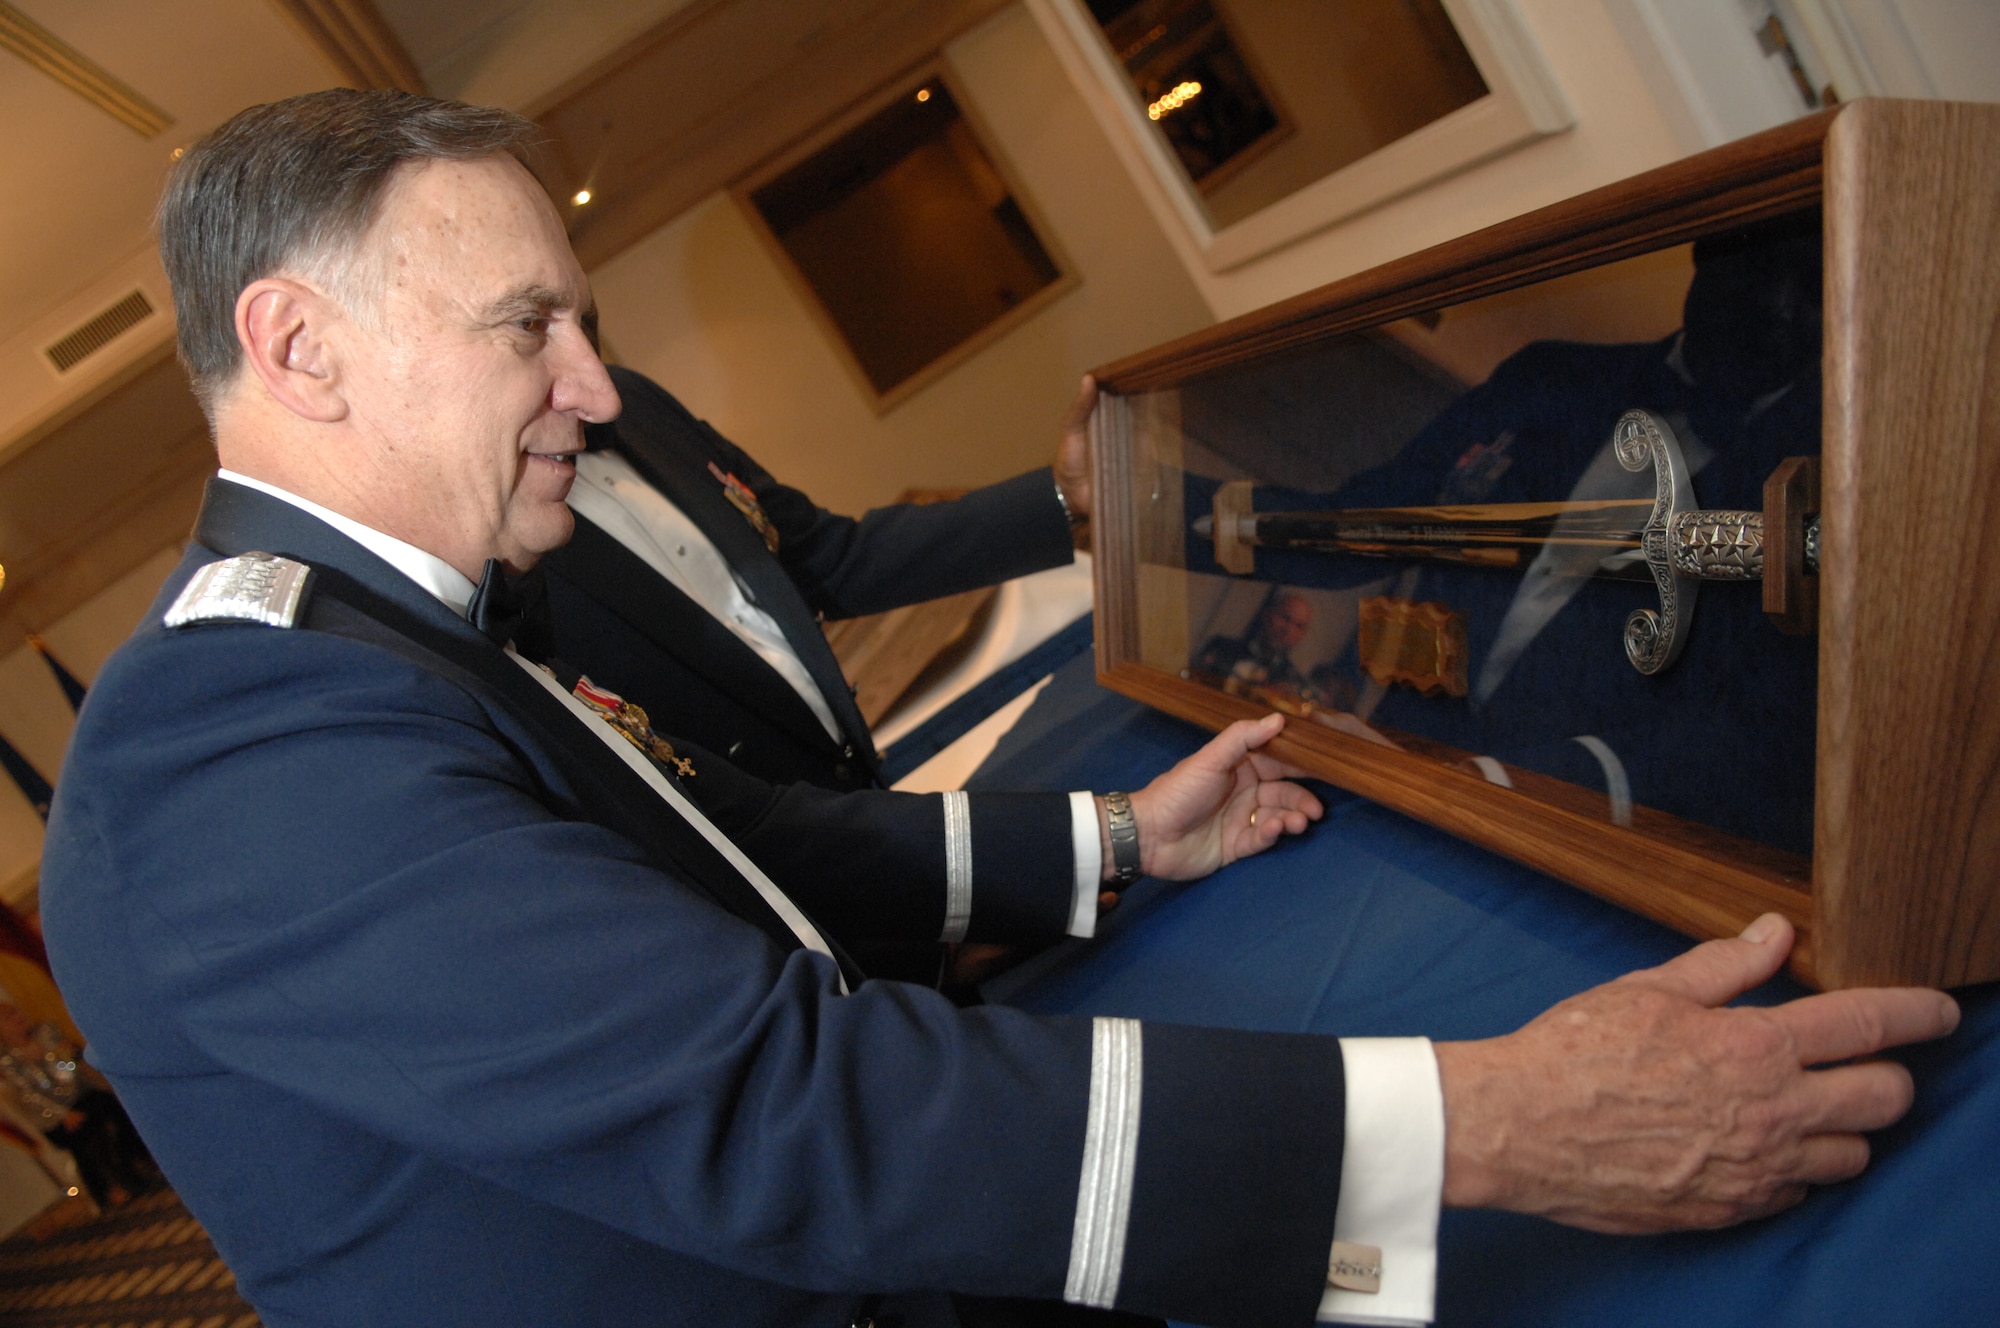 U.S. Air Forces in Europe Commander, General William T. Hobbins, admires a sword he received during a USAFE order of the sword induction ceremony in his honor.  The sword represents truth, justice, and rightfully used power and induction into the order is the highest honor an enlisted organization or command can bestow on an individual. (U.S. Air Force photo by Tech Sgt. Corey Clements)